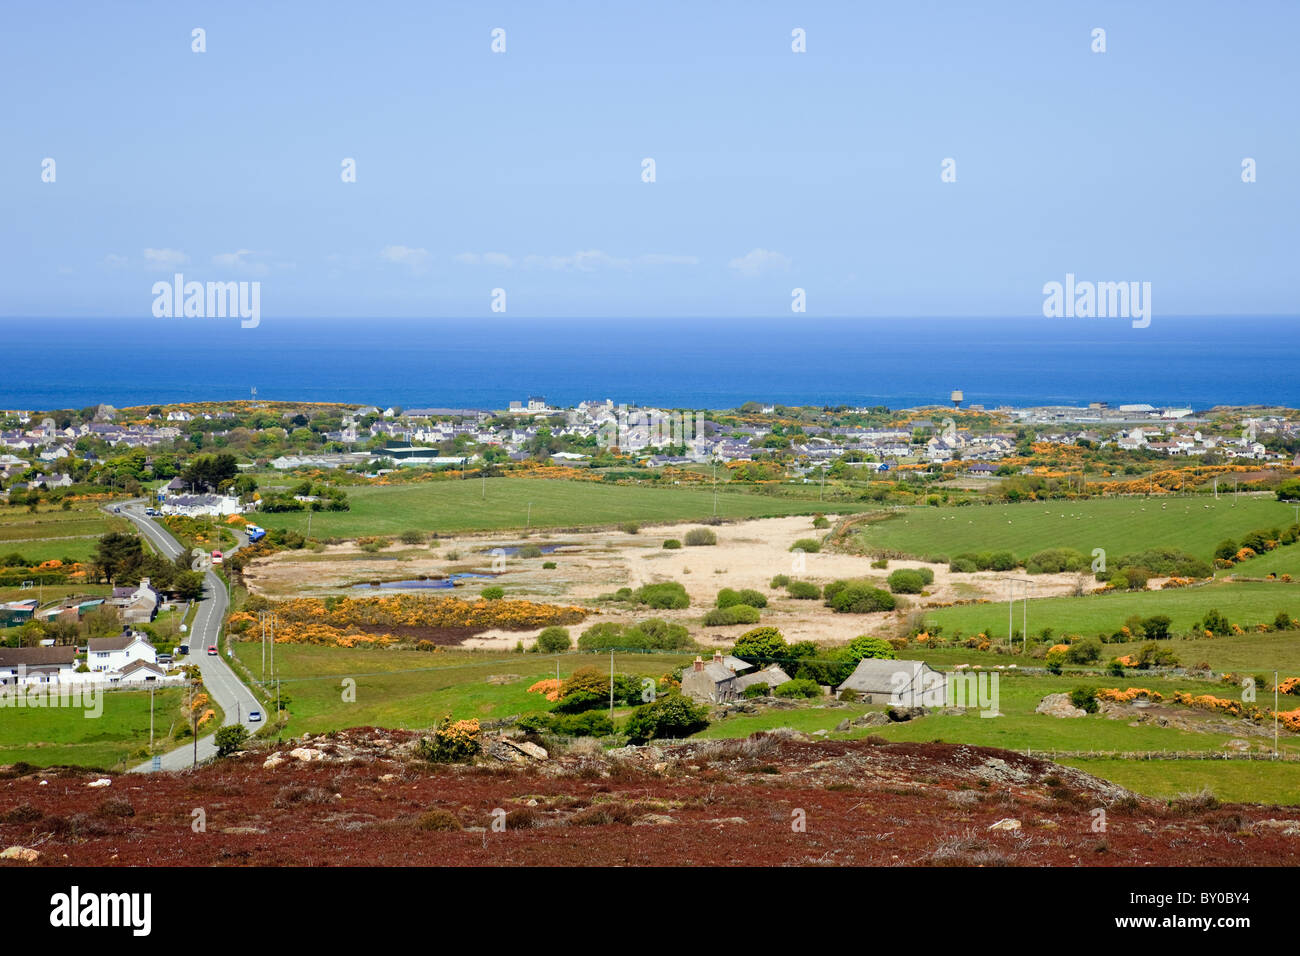 High view across countryside to Amlwch on the Welsh coast from Parys Mountain. Amlwch, Isle of Anglesey, North Wales, UK Stock Photo